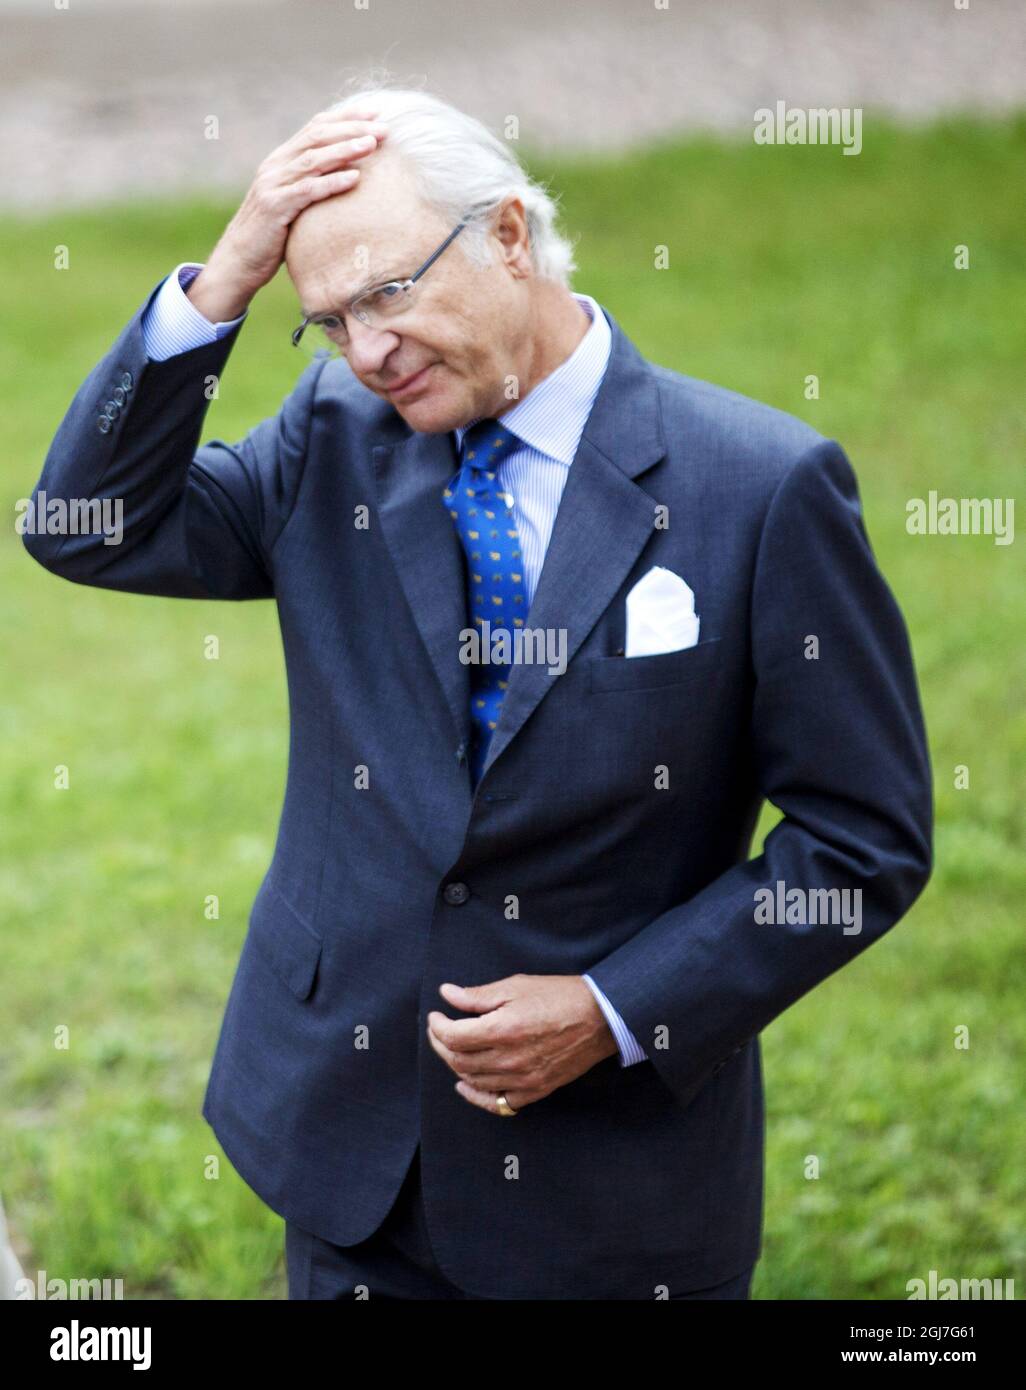 HALMSTAD 20120904. King Carl Gustaf during a visit to a farming estate near Halmstad, Sweden, September 4, 2012 .The Royals are on a one day visit to the county of Halland. Foto: Anders Andersson/SCANPIX Kod 11091 Stock Photo